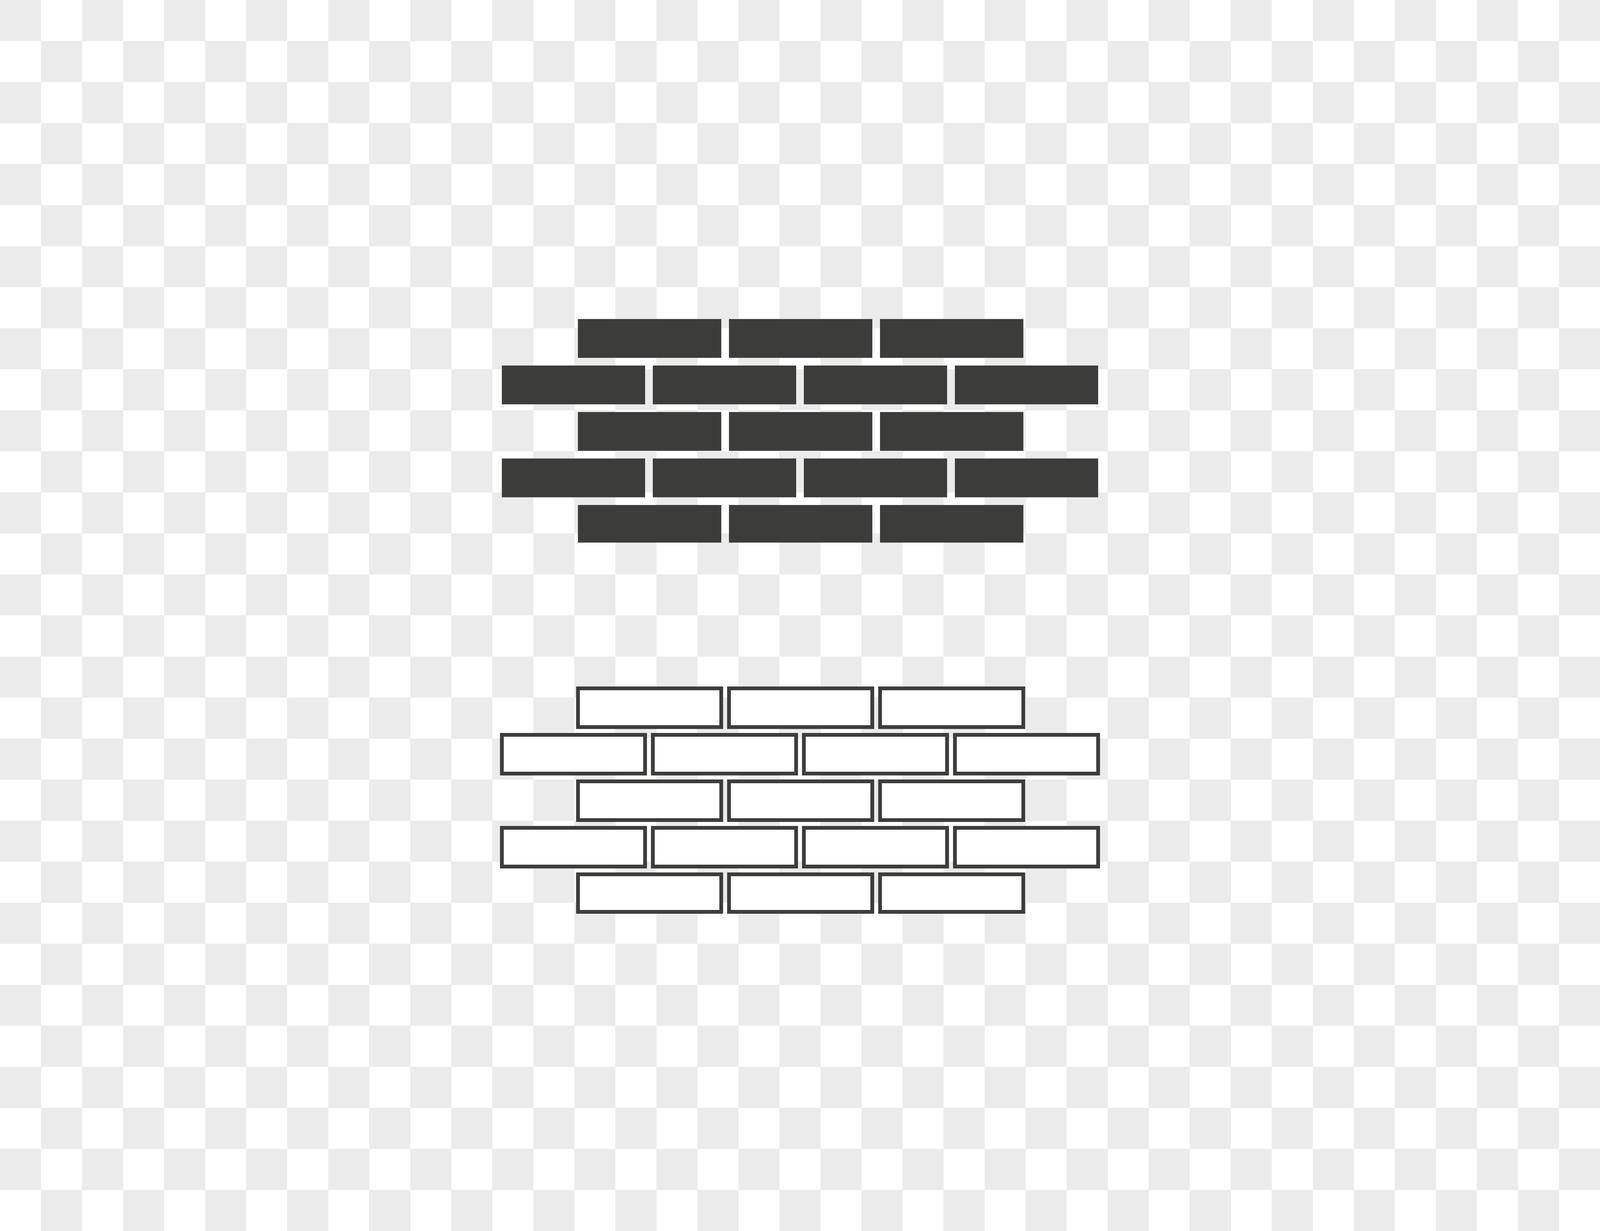 Bricks, wall, work icon on transparent background. Vector illustration. by Vertyb